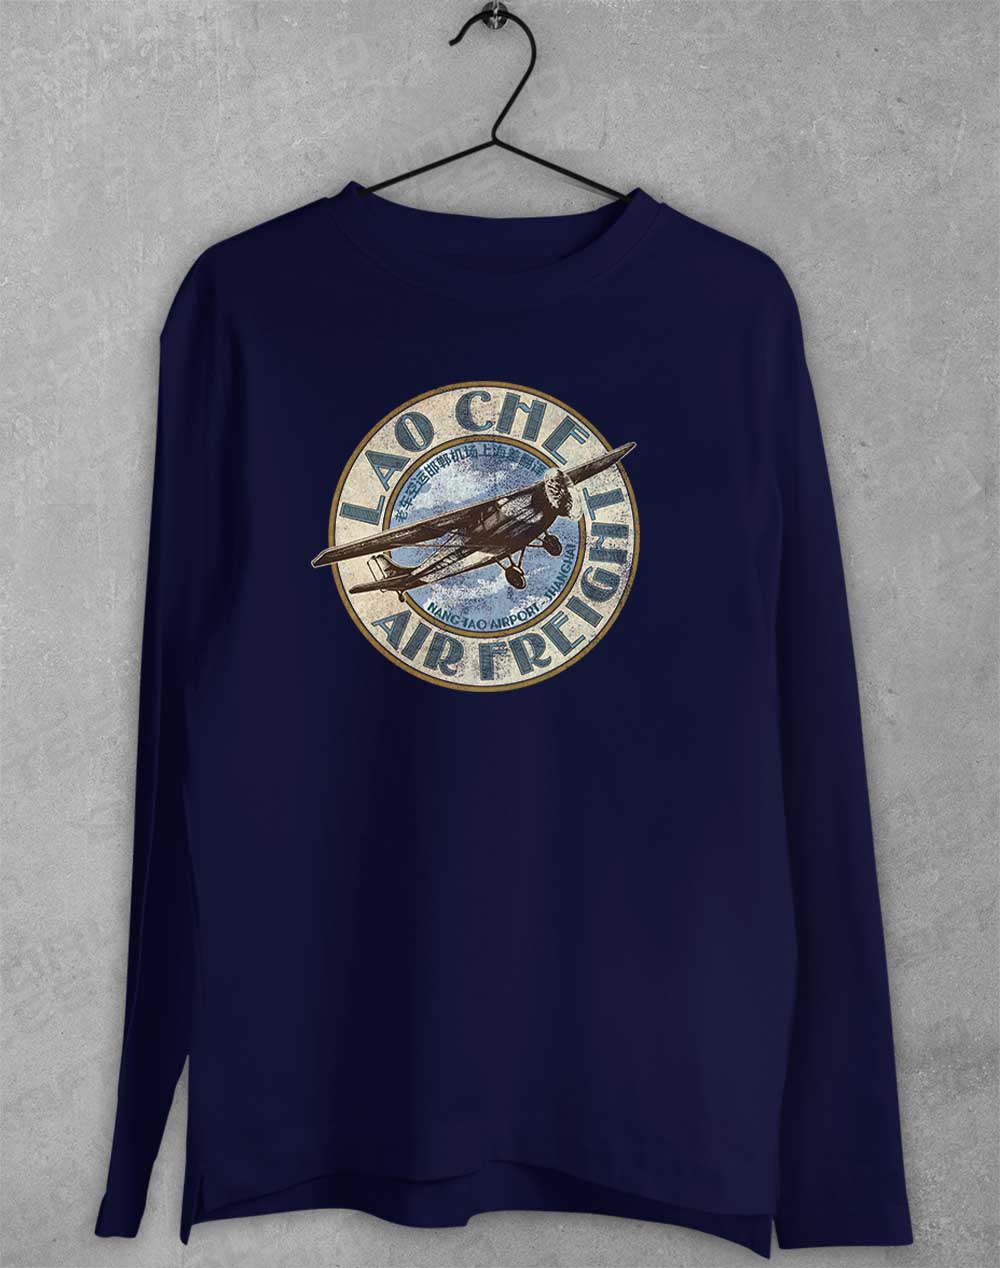 Navy - Lao Che Air Freight Long Sleeve T-Shirt